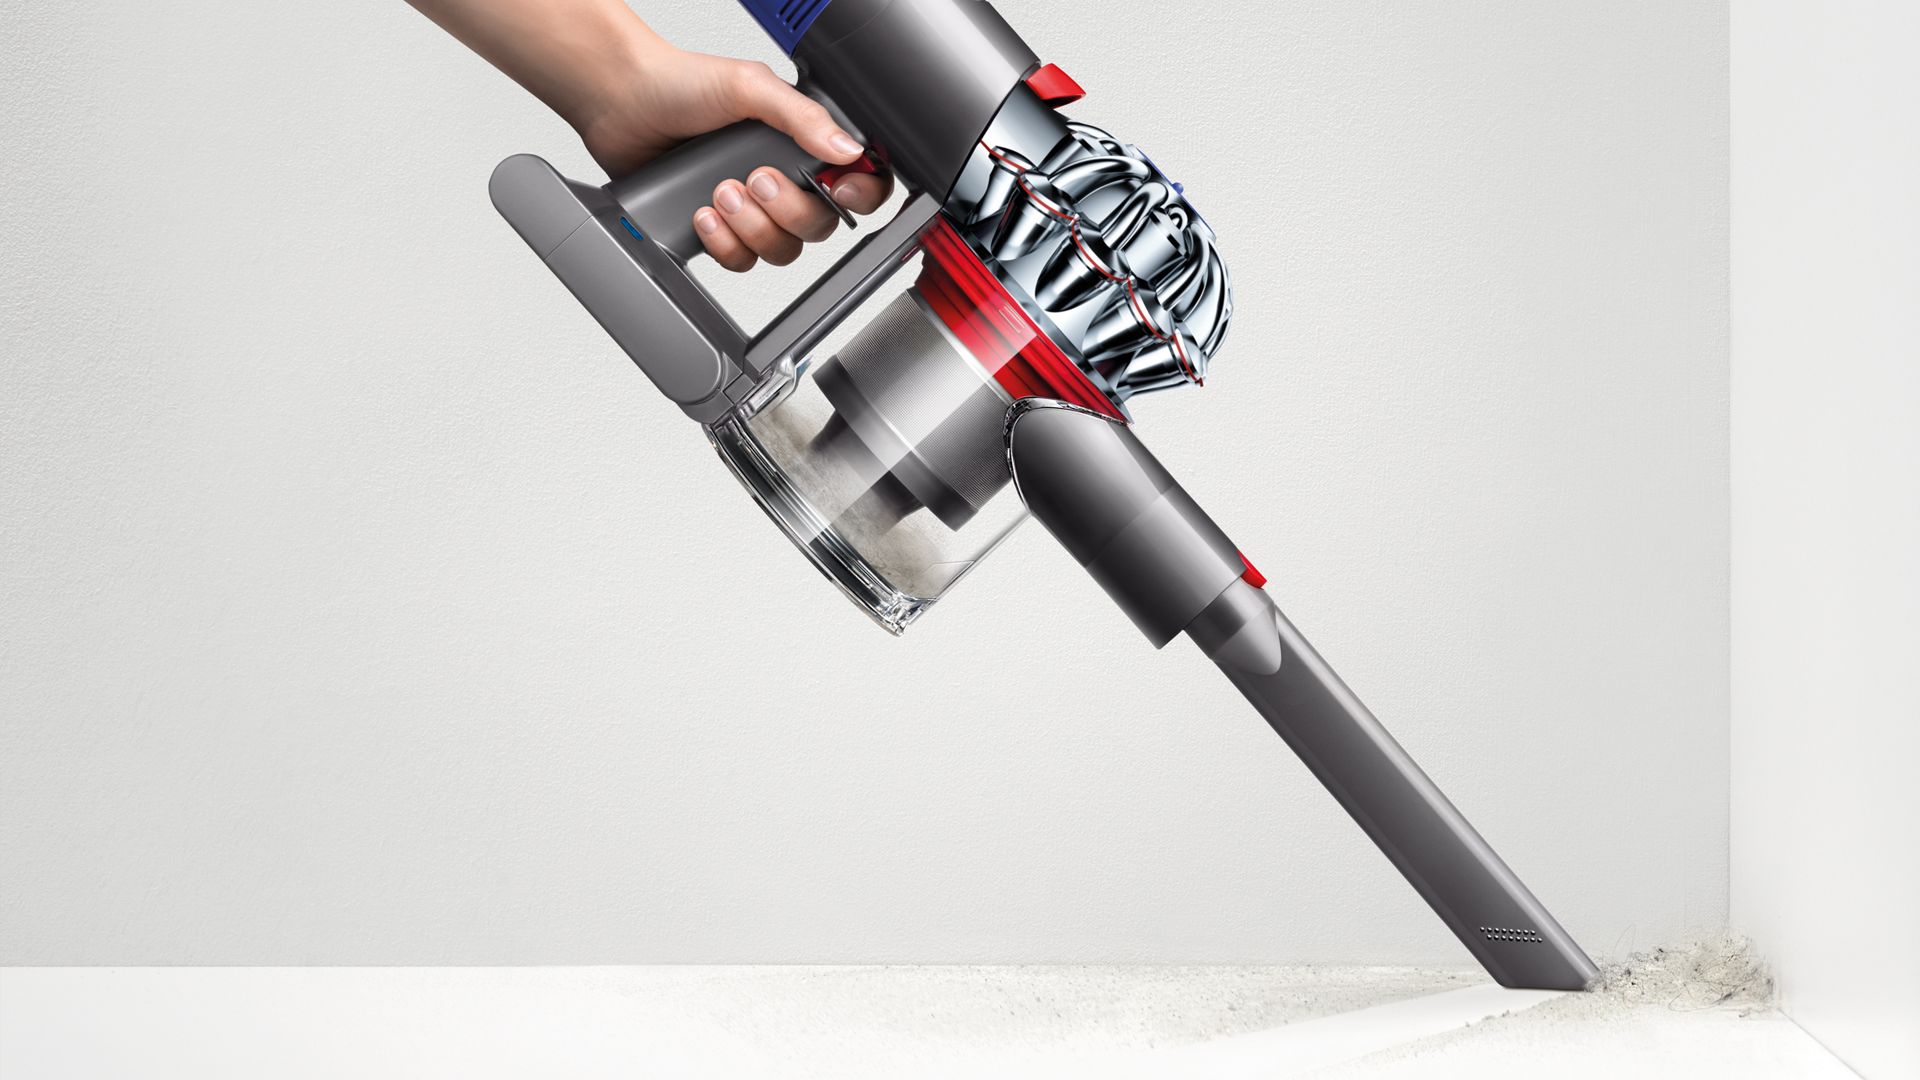 Dyson V7 Vacuum Cleaner for Car Interiors & Carpets |Dyson India